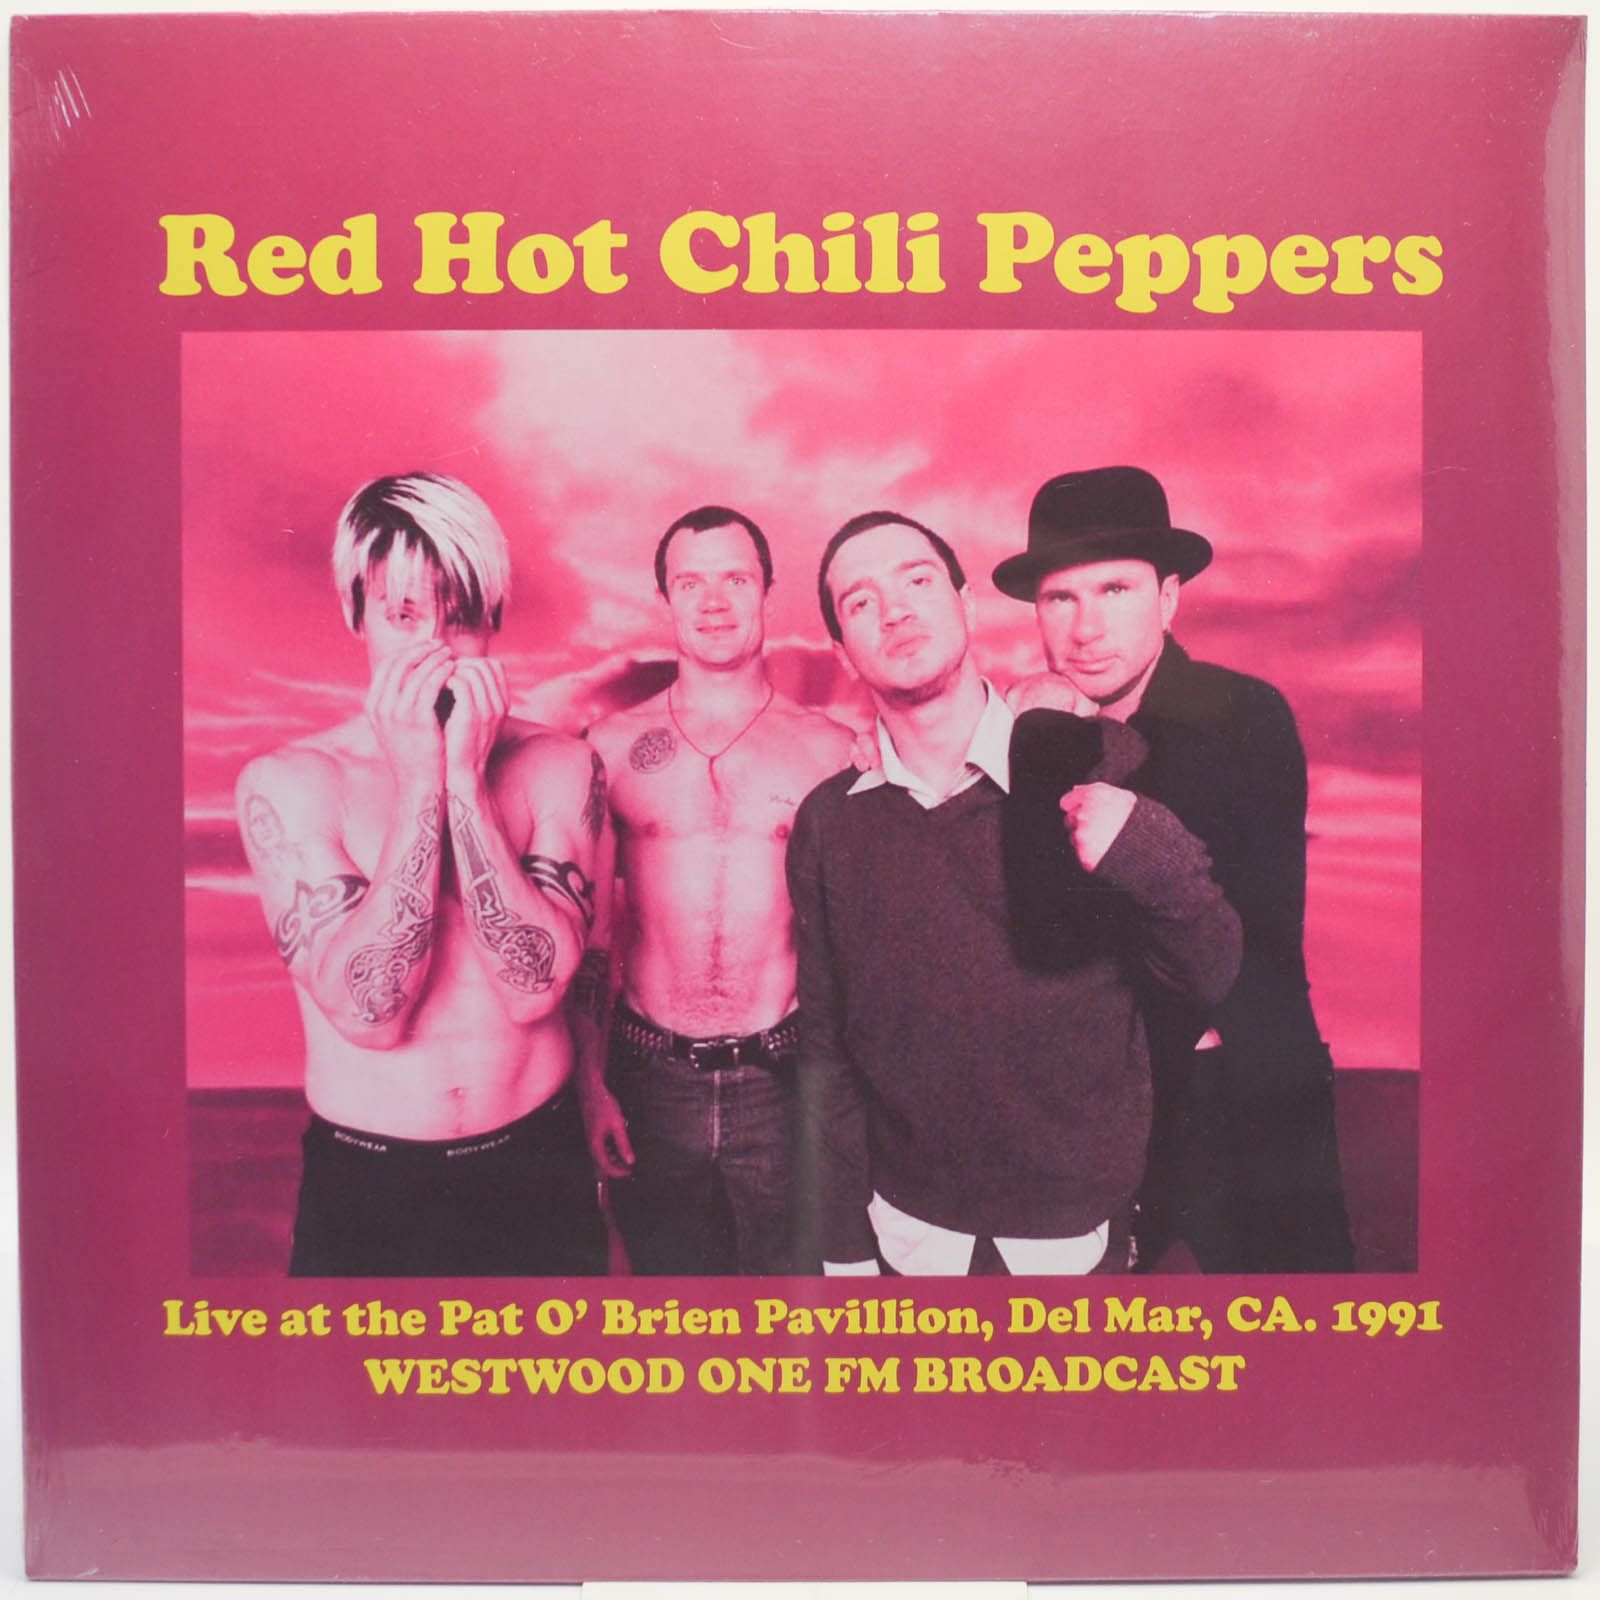 Red Hot Chili Peppers — Live At The Pat O'Brien Pavillion, Del Mar, CA 1991 Westwood One FM Broadcast, 2021